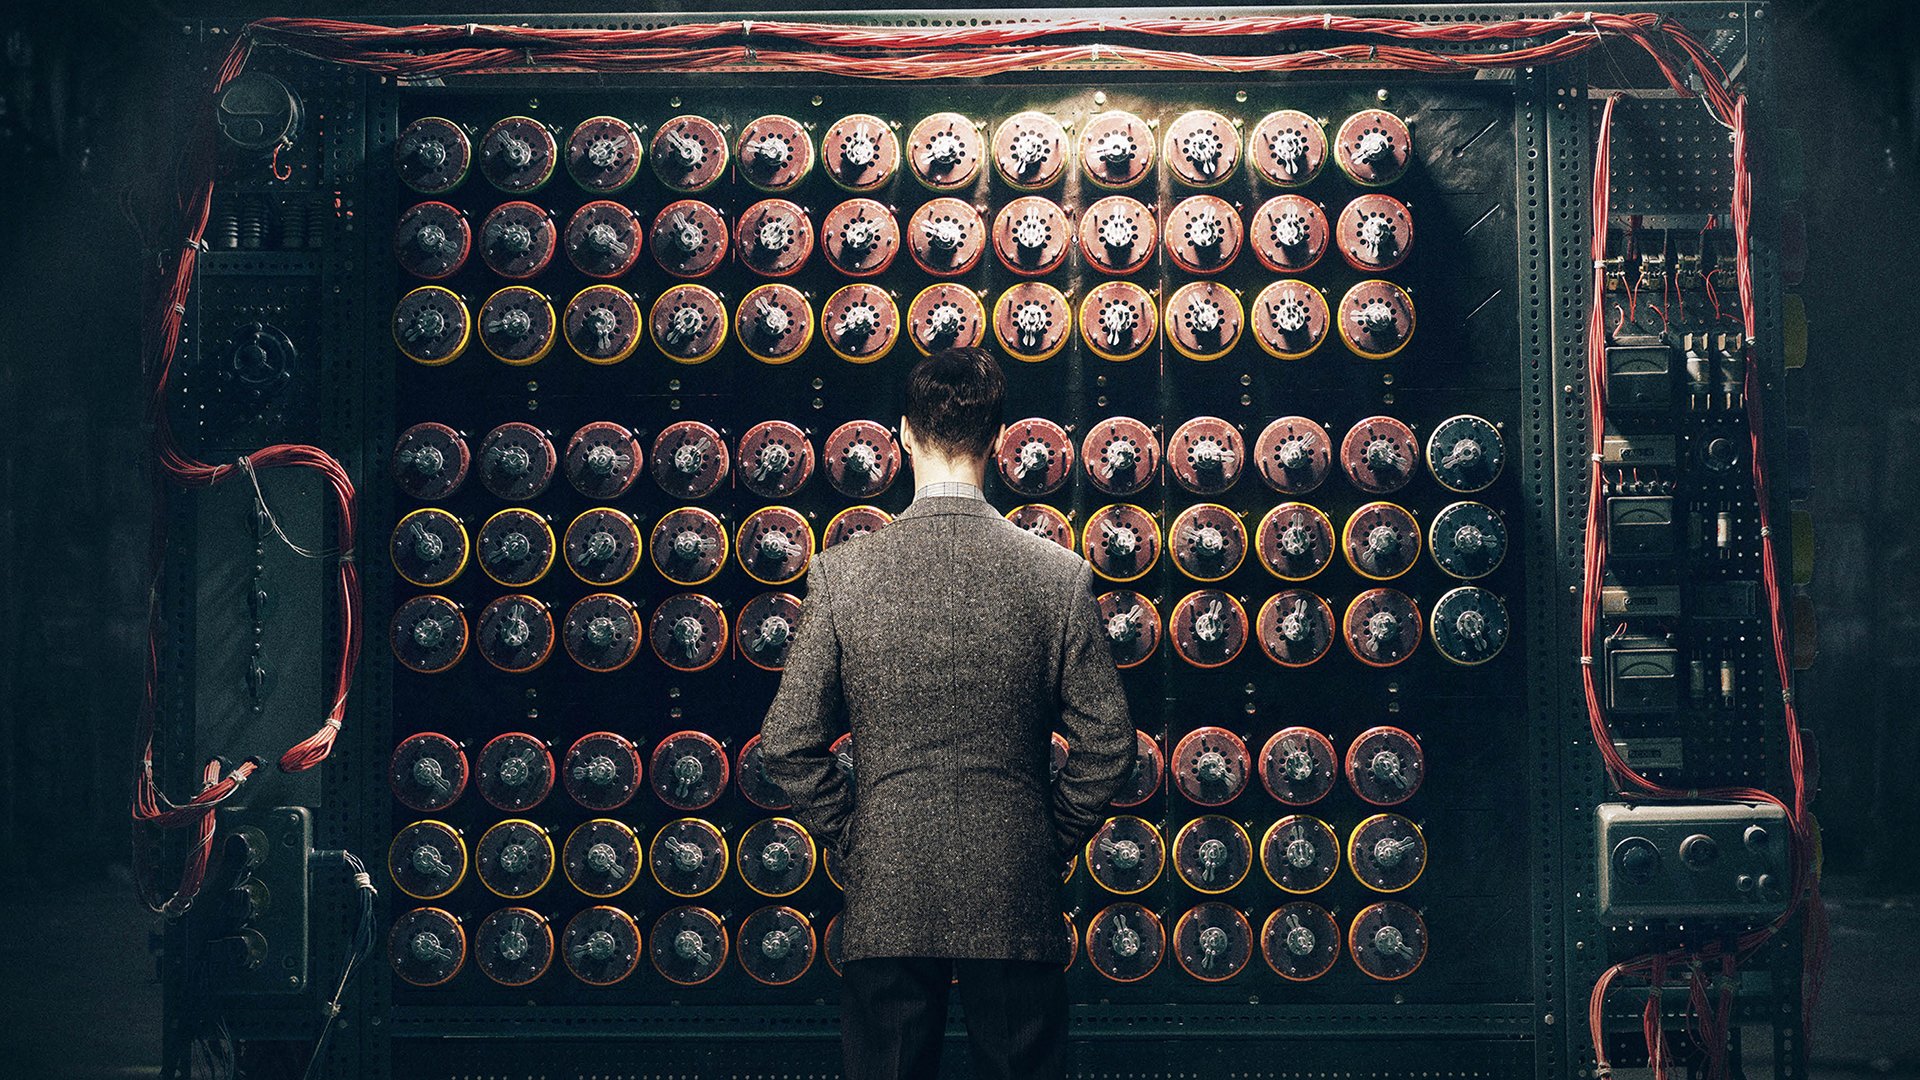 HQ The Imitation Game Background Images